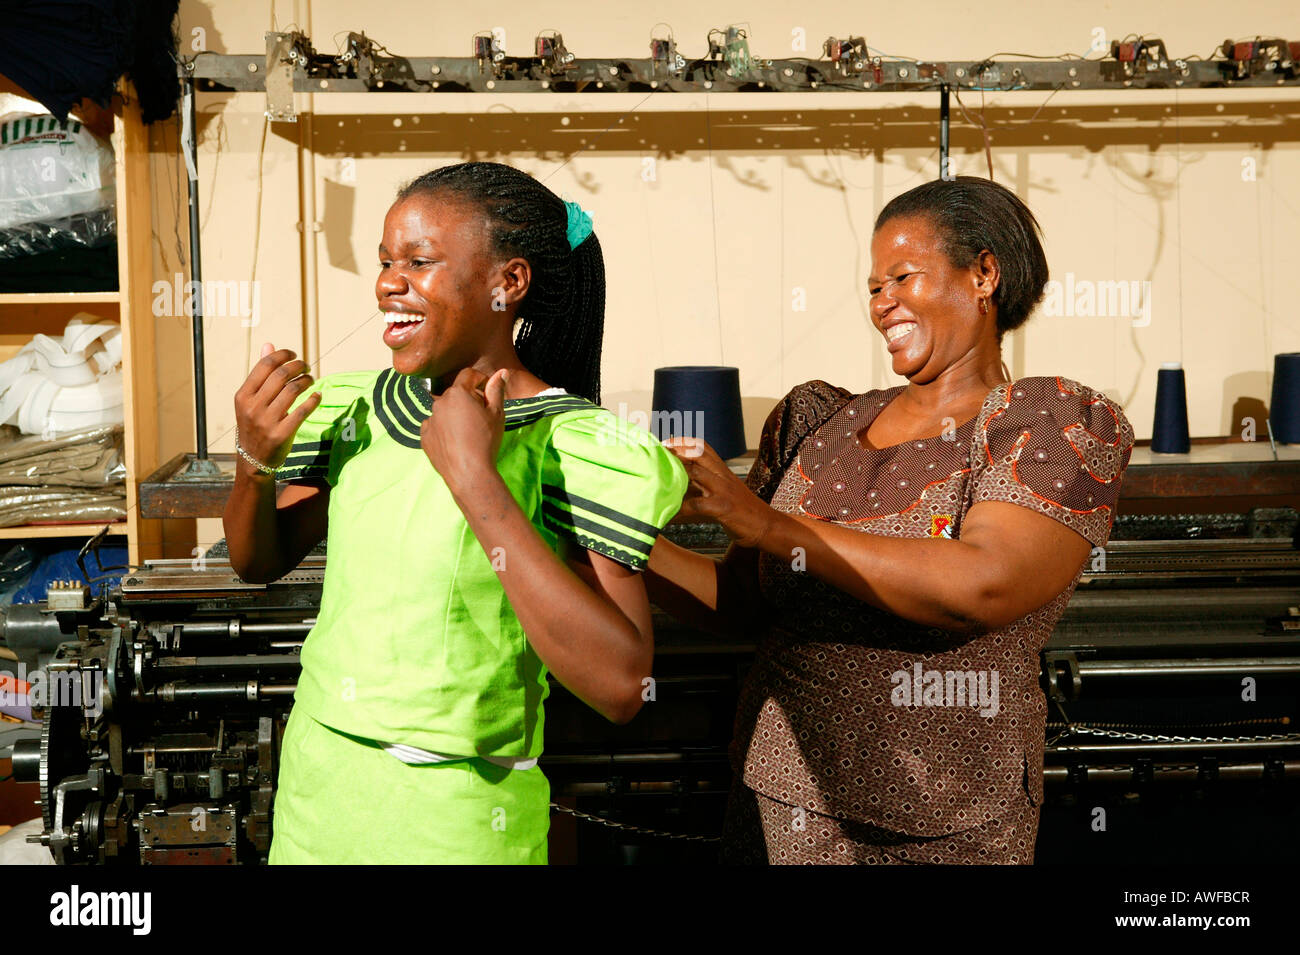 Women trying on a dress at a tailor's shop of an HIV/AIDS aid organization, Gaborone, Botswana, Africa Stock Photo